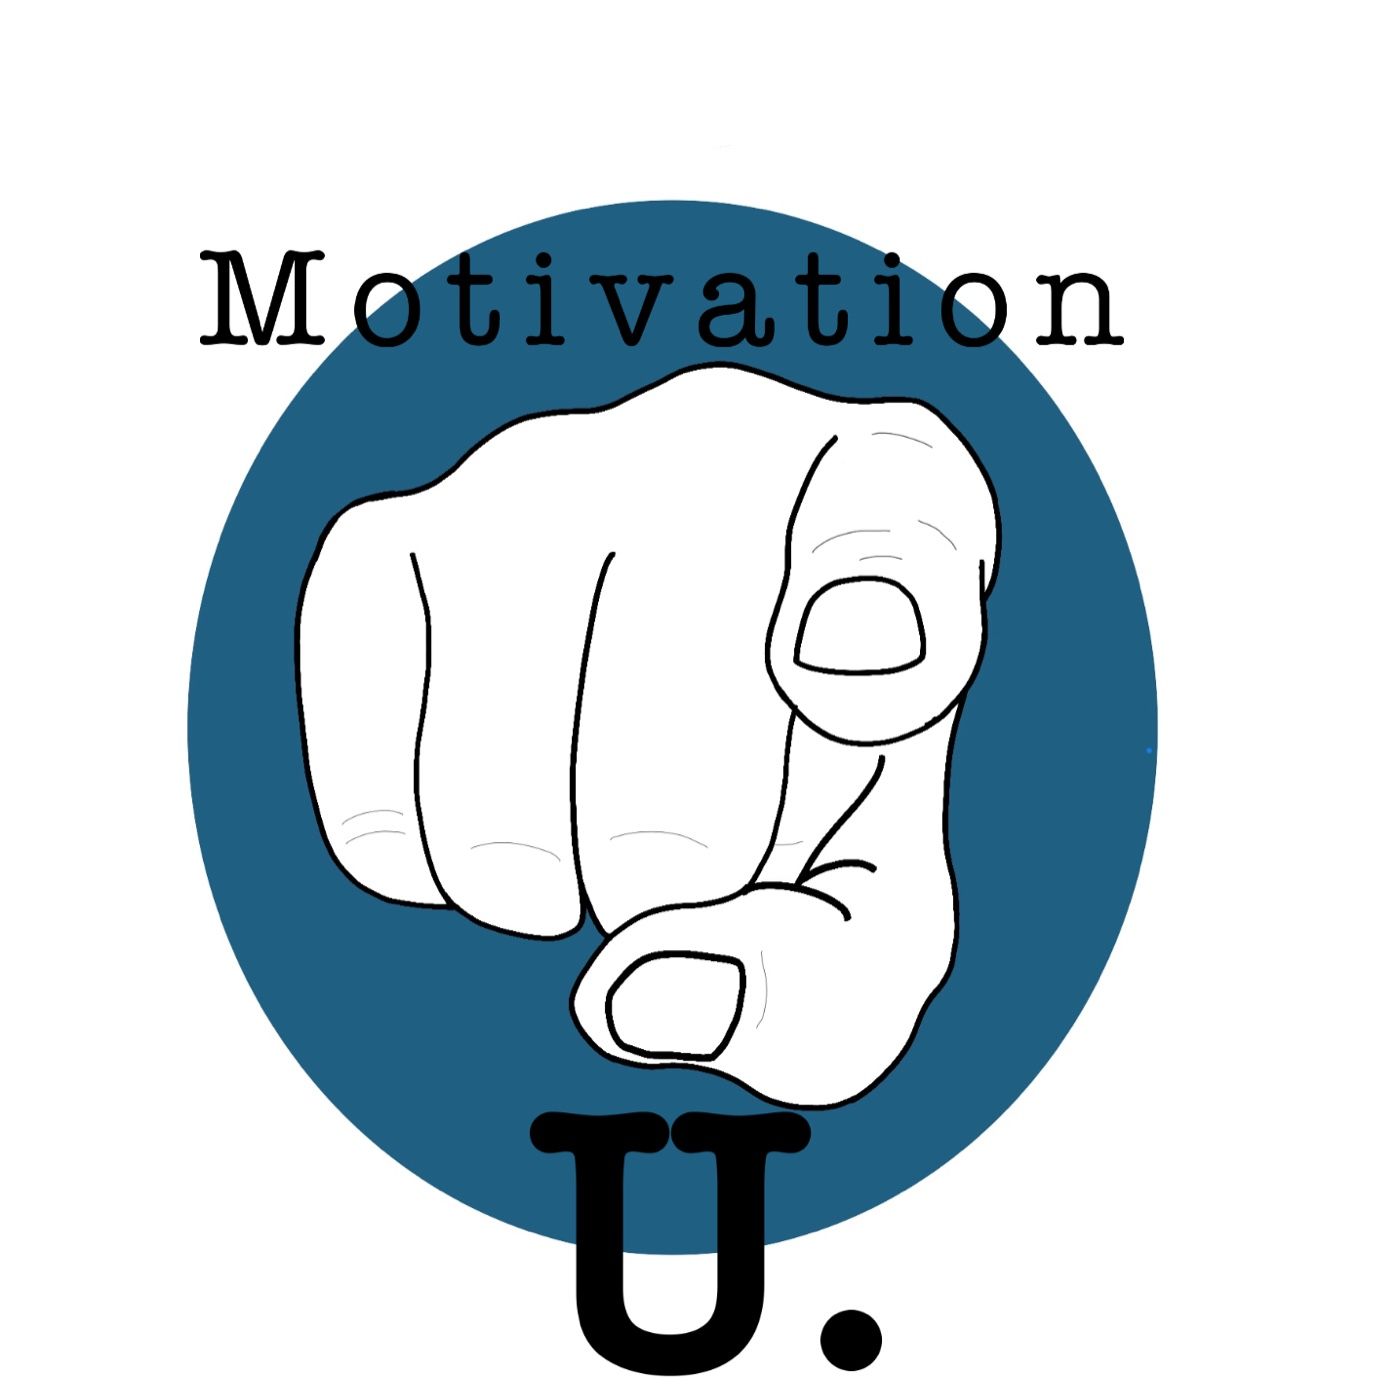 Episode 239 - Motivation U - Paul Heyman - “If you want to succeed, you can’t be afraid to …”